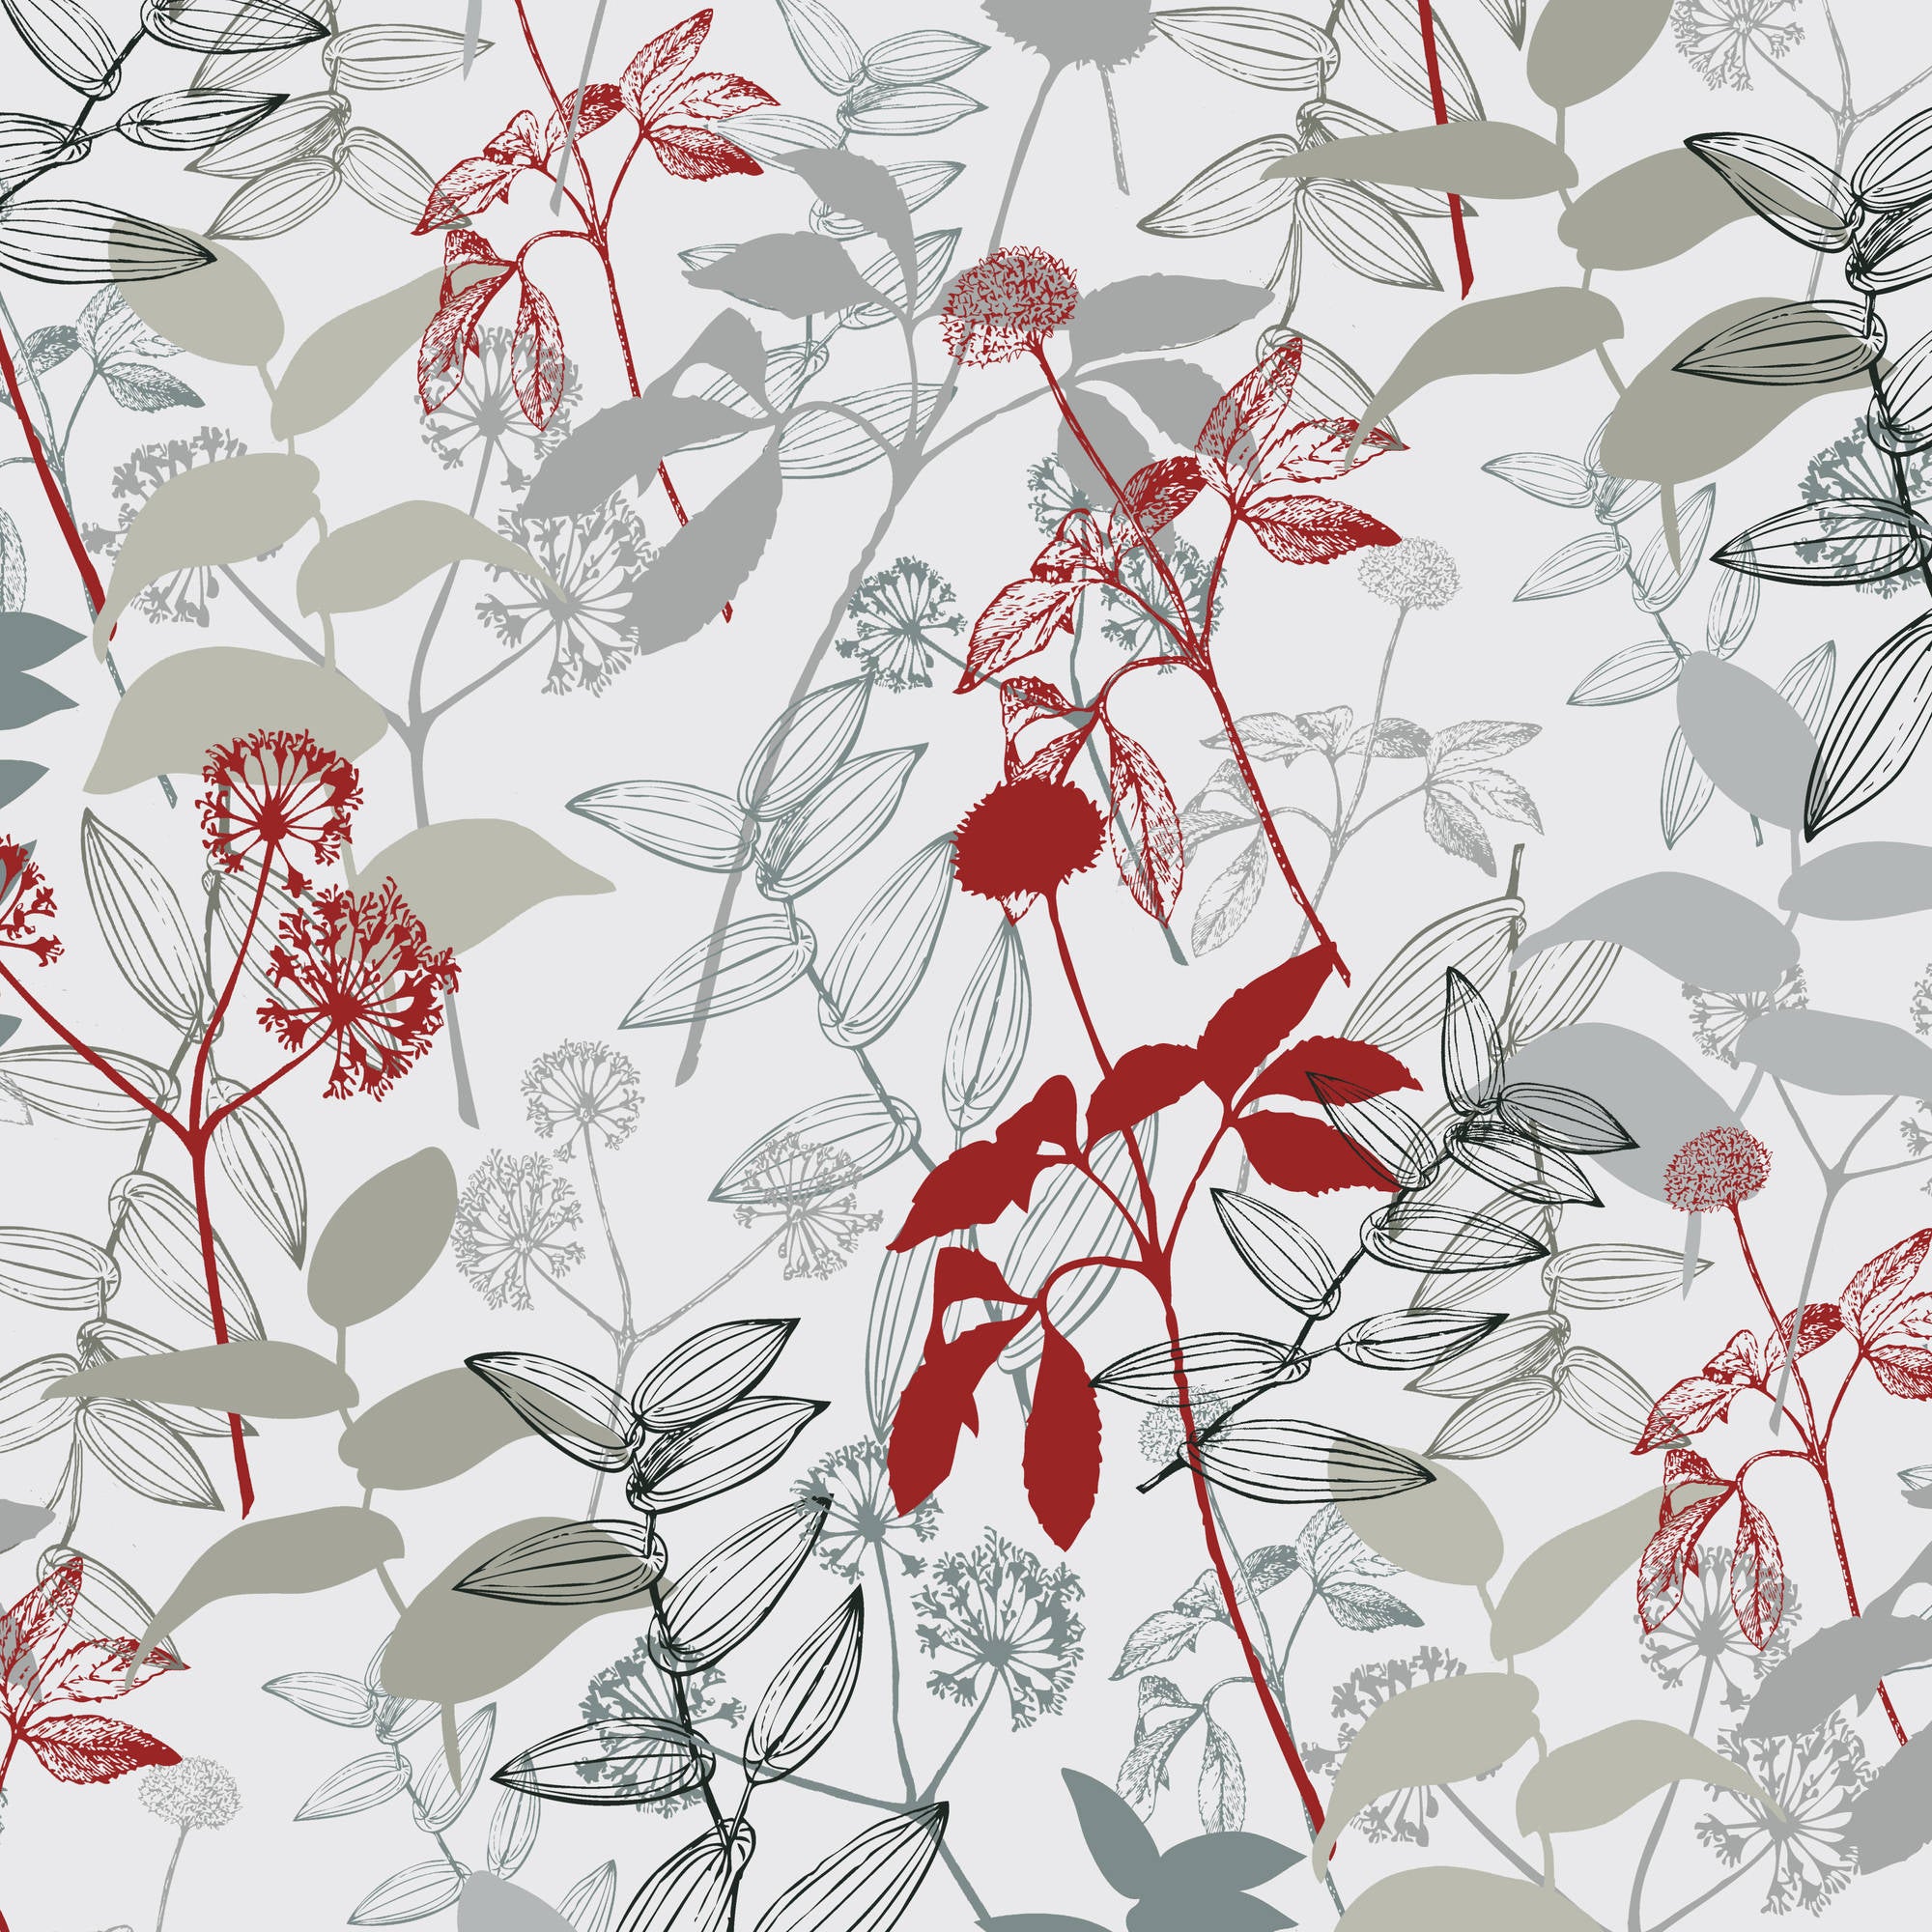 Waverly Inspirations Cotton 44" Botanical Onyx Color Sewing Fabric by the Yard